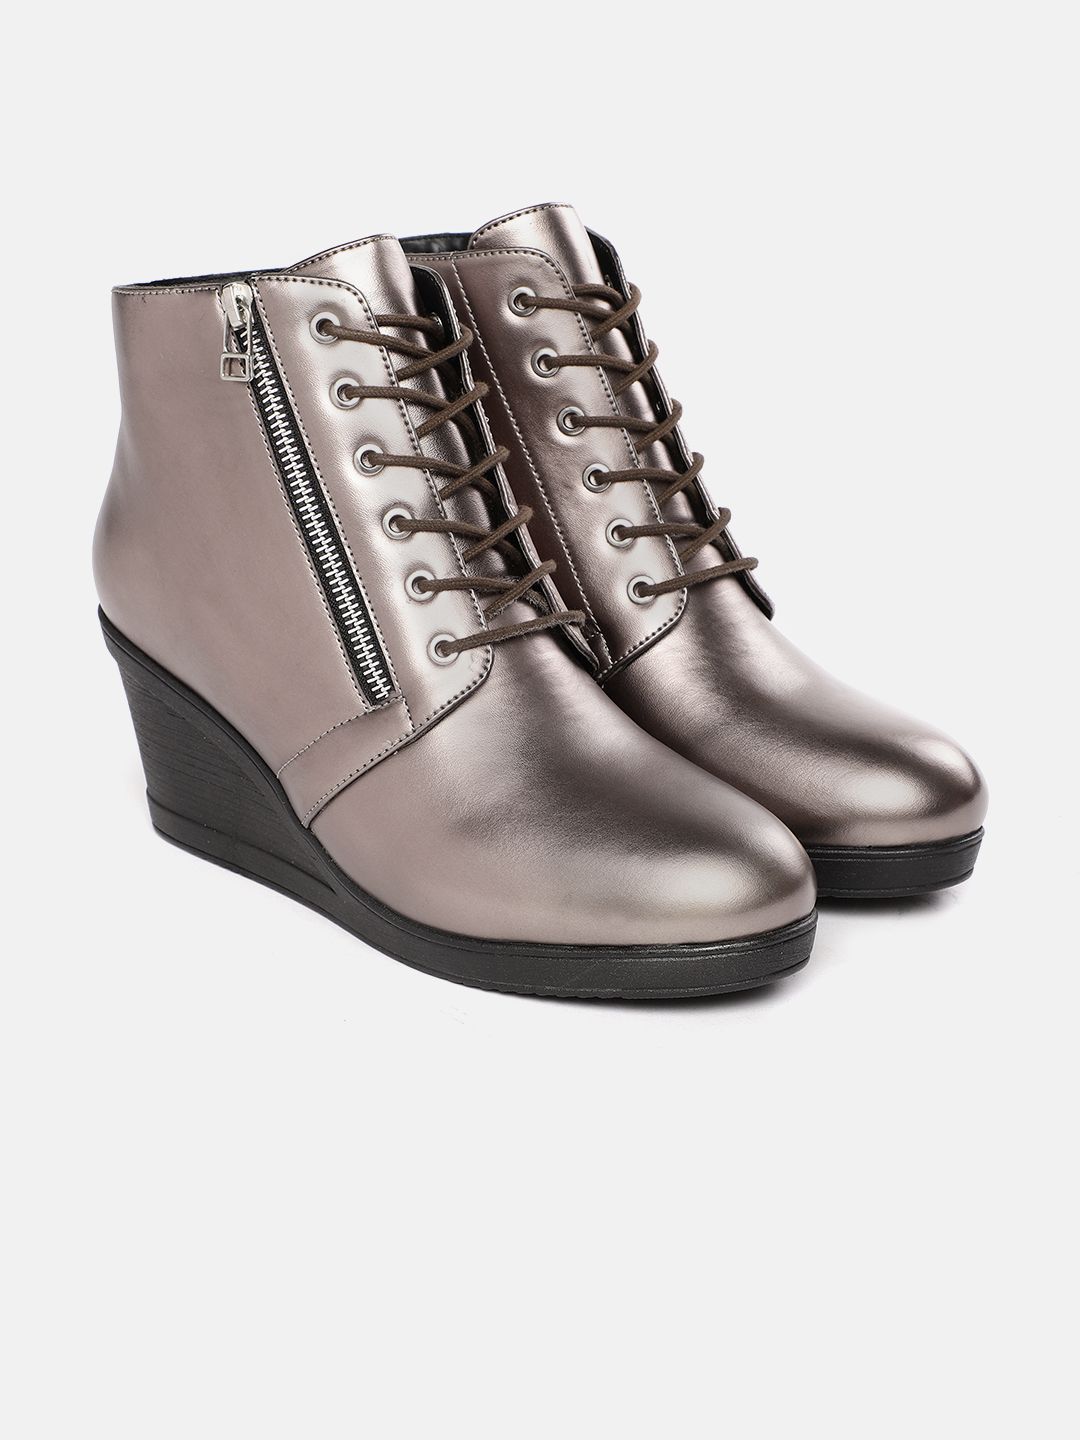 DressBerry Women Gunmetal-Toned Solid Mid-Top Heeled Boots Price in India